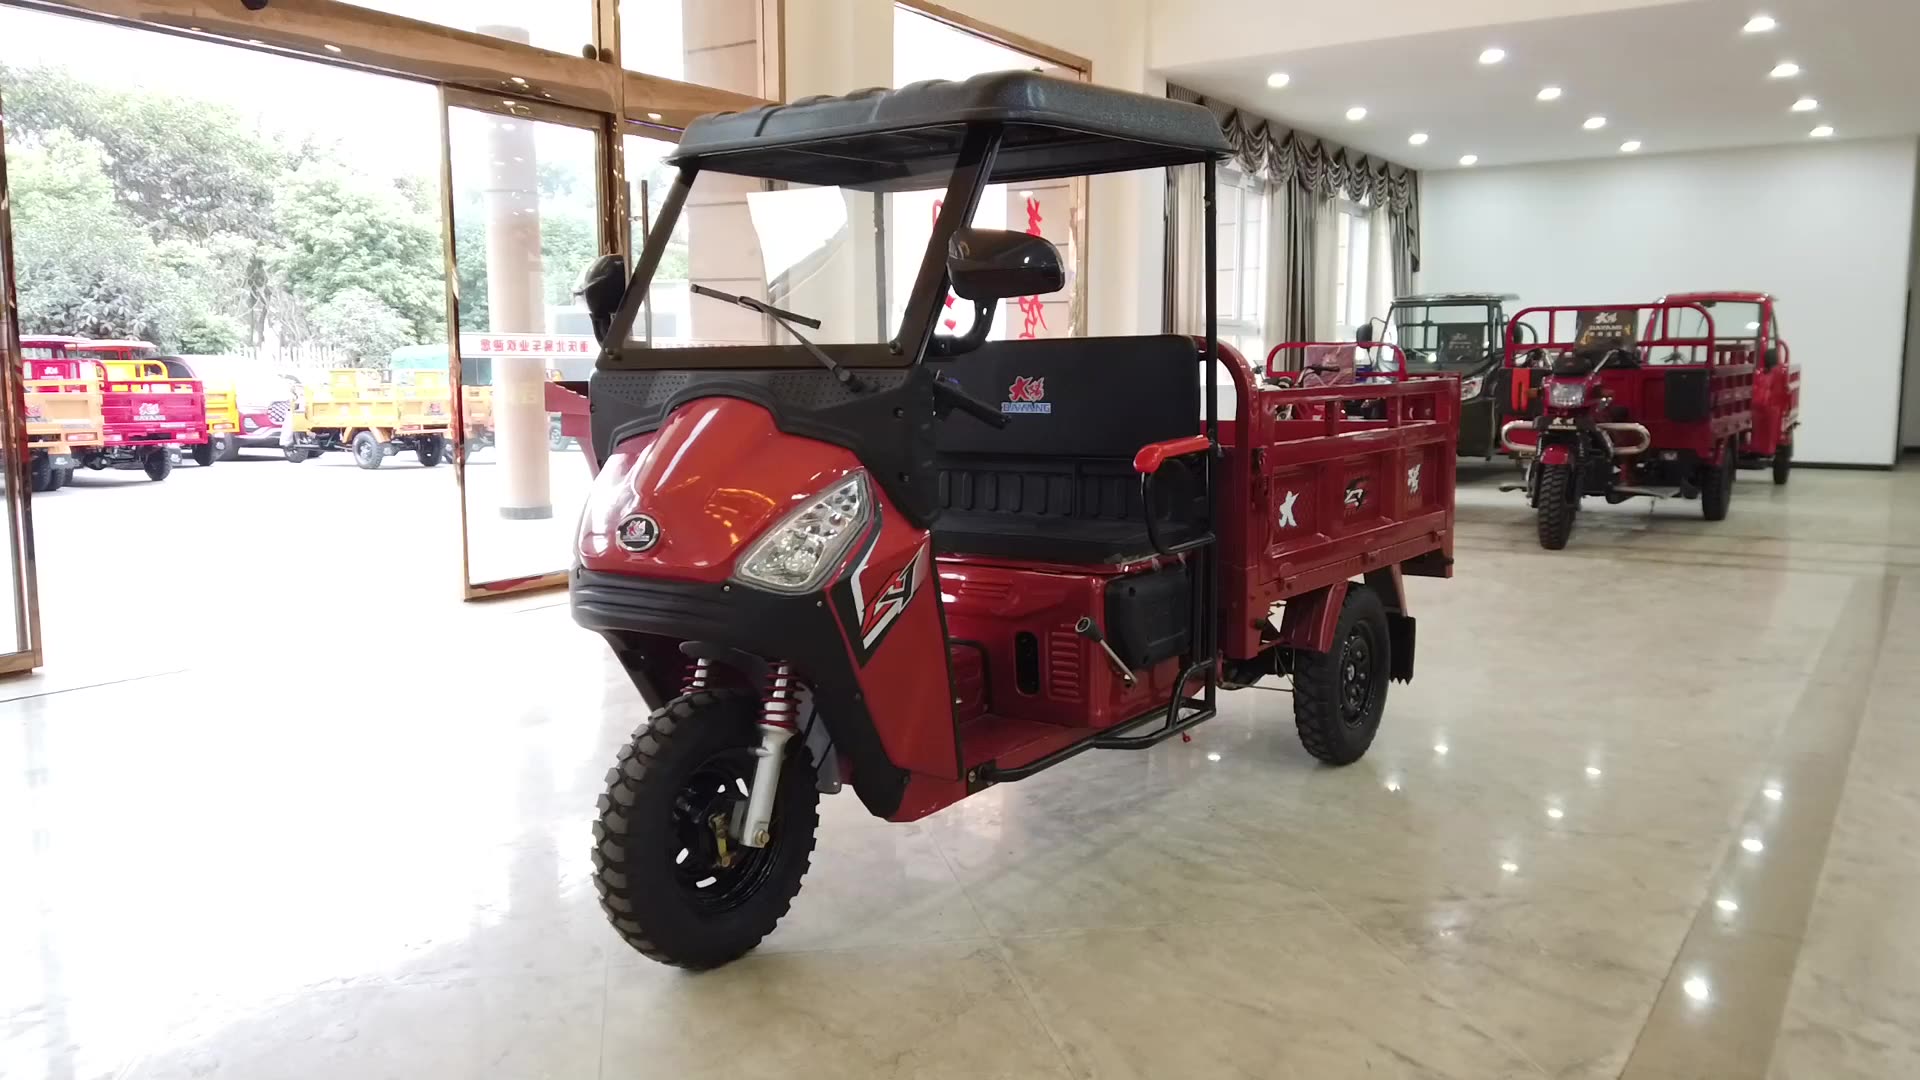 China factory customized 2021 origin design price tricycle gasoline classic light loading 150cc air cooled cylinder power